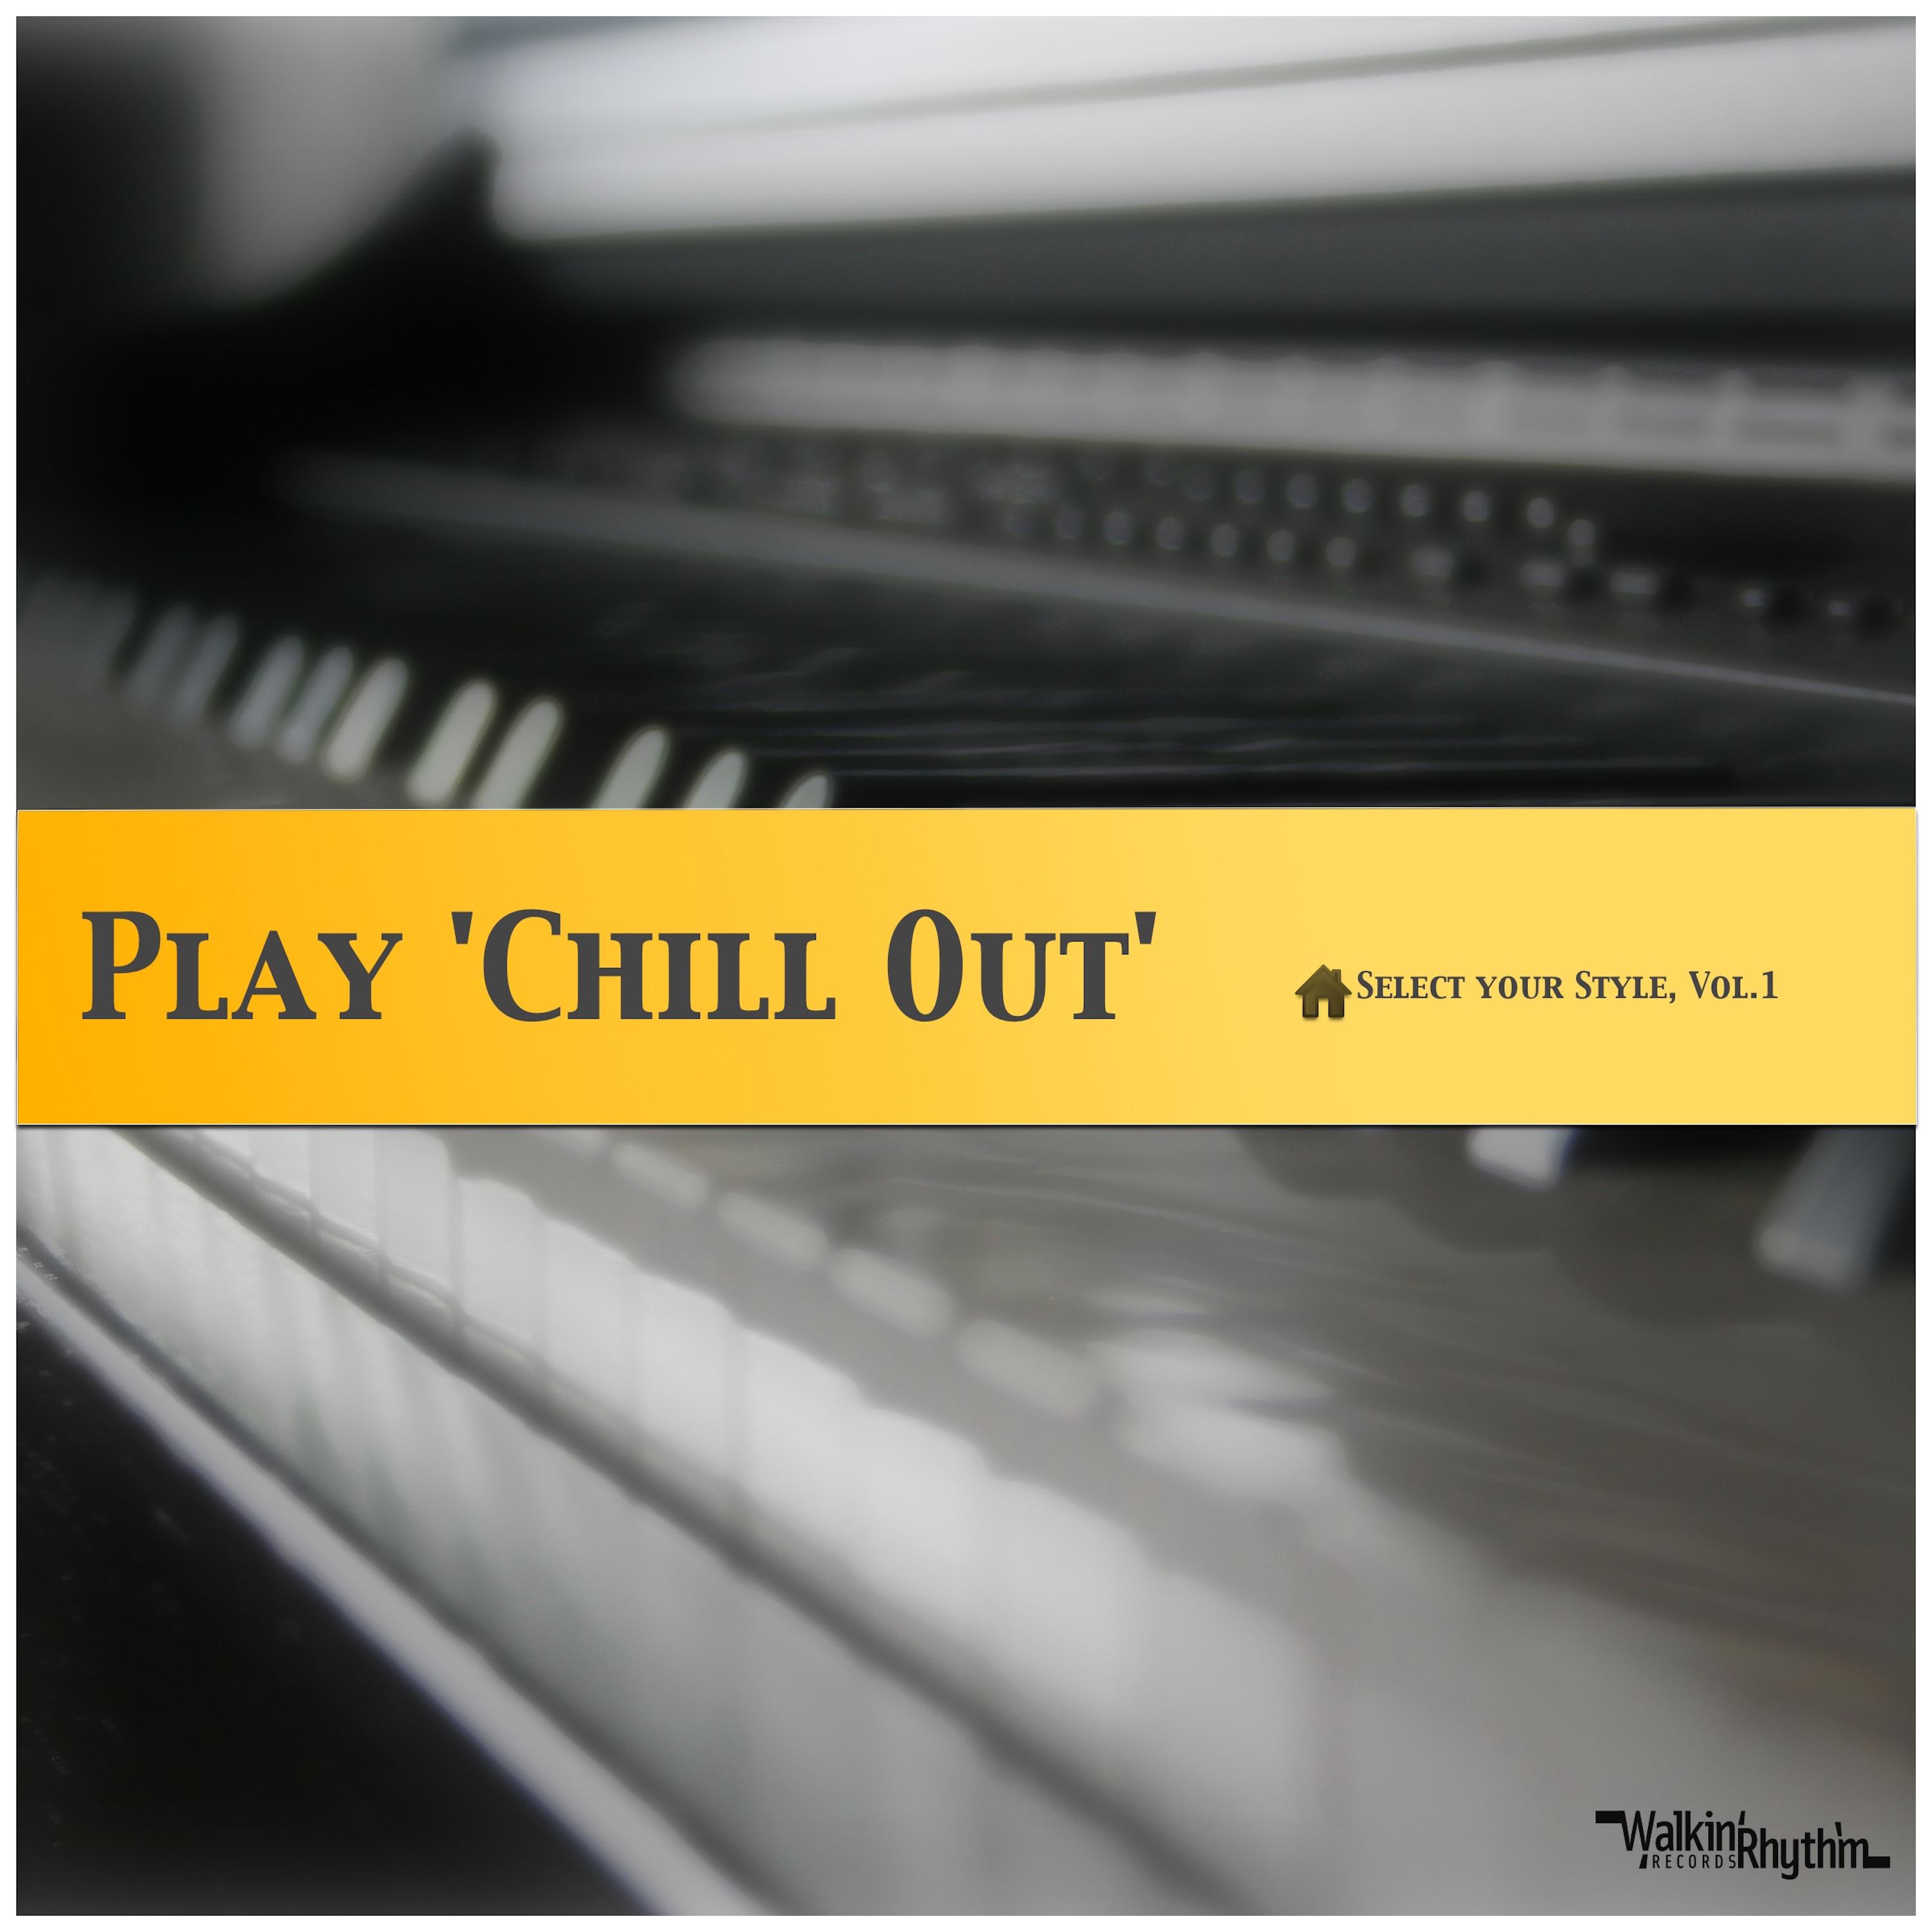 Play 'Chill Out' Select your Style, Vol. 1